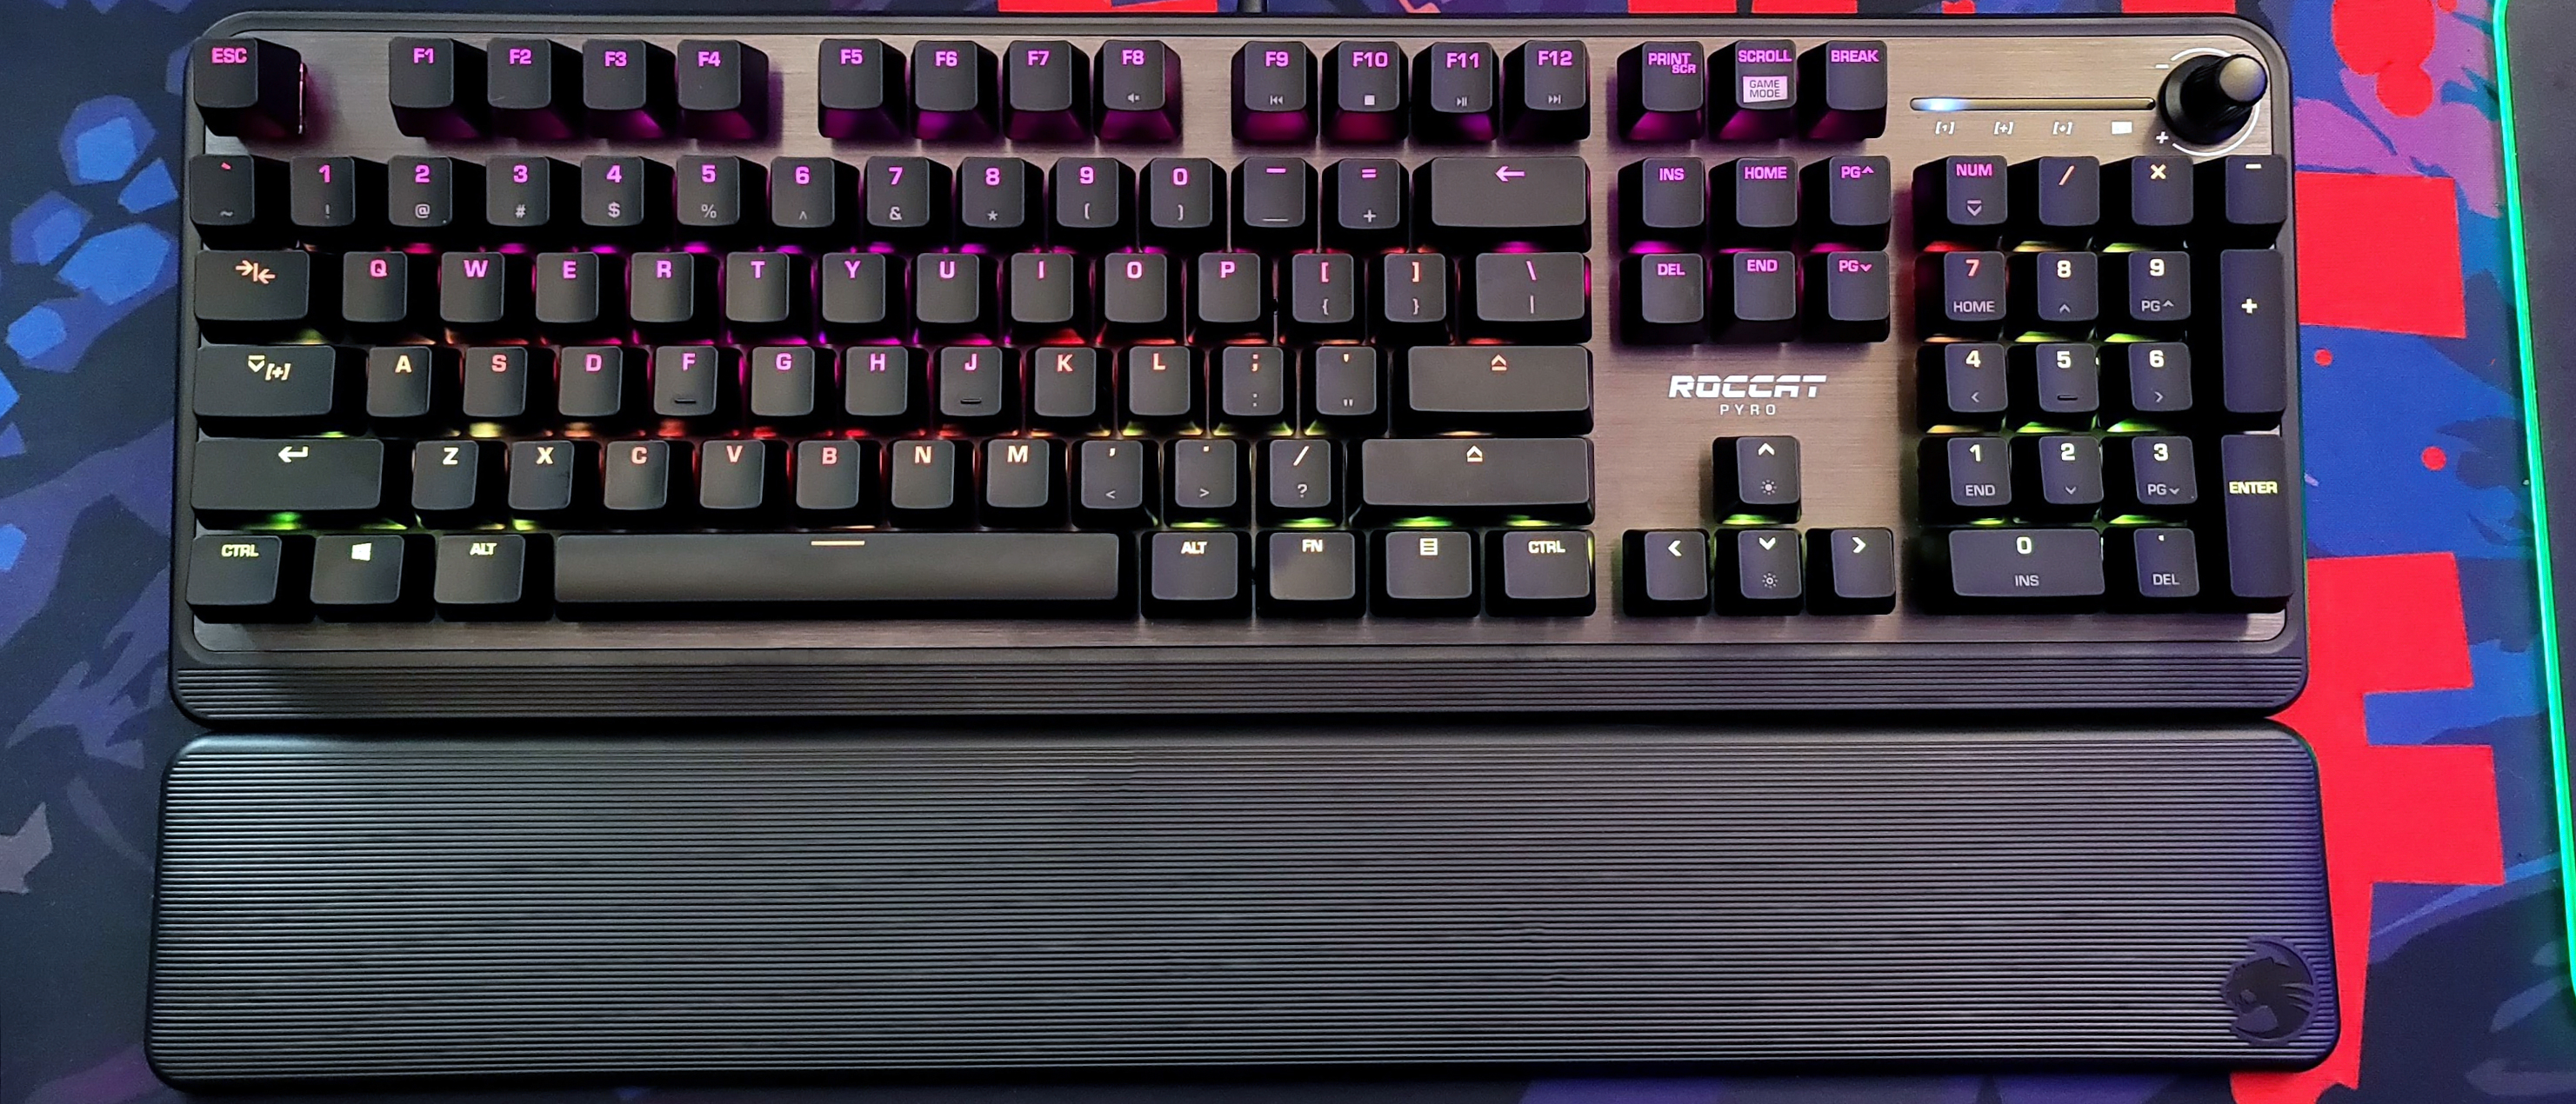 Roccat Pyro Review: Back to the Basics | Tom's Hardware